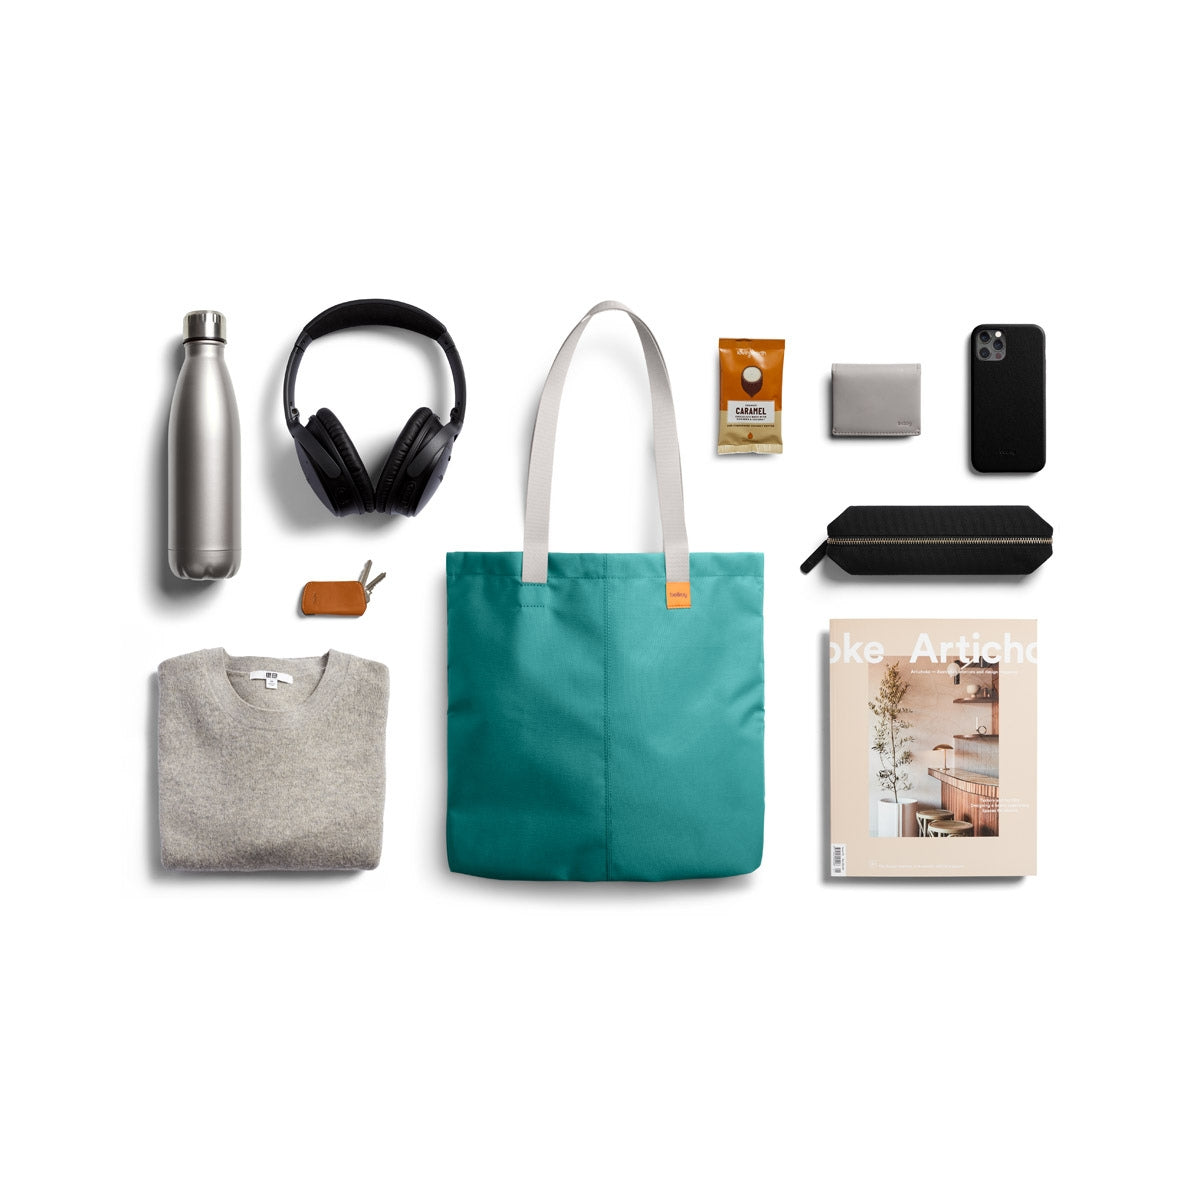 Bellroy City Tote in Teal